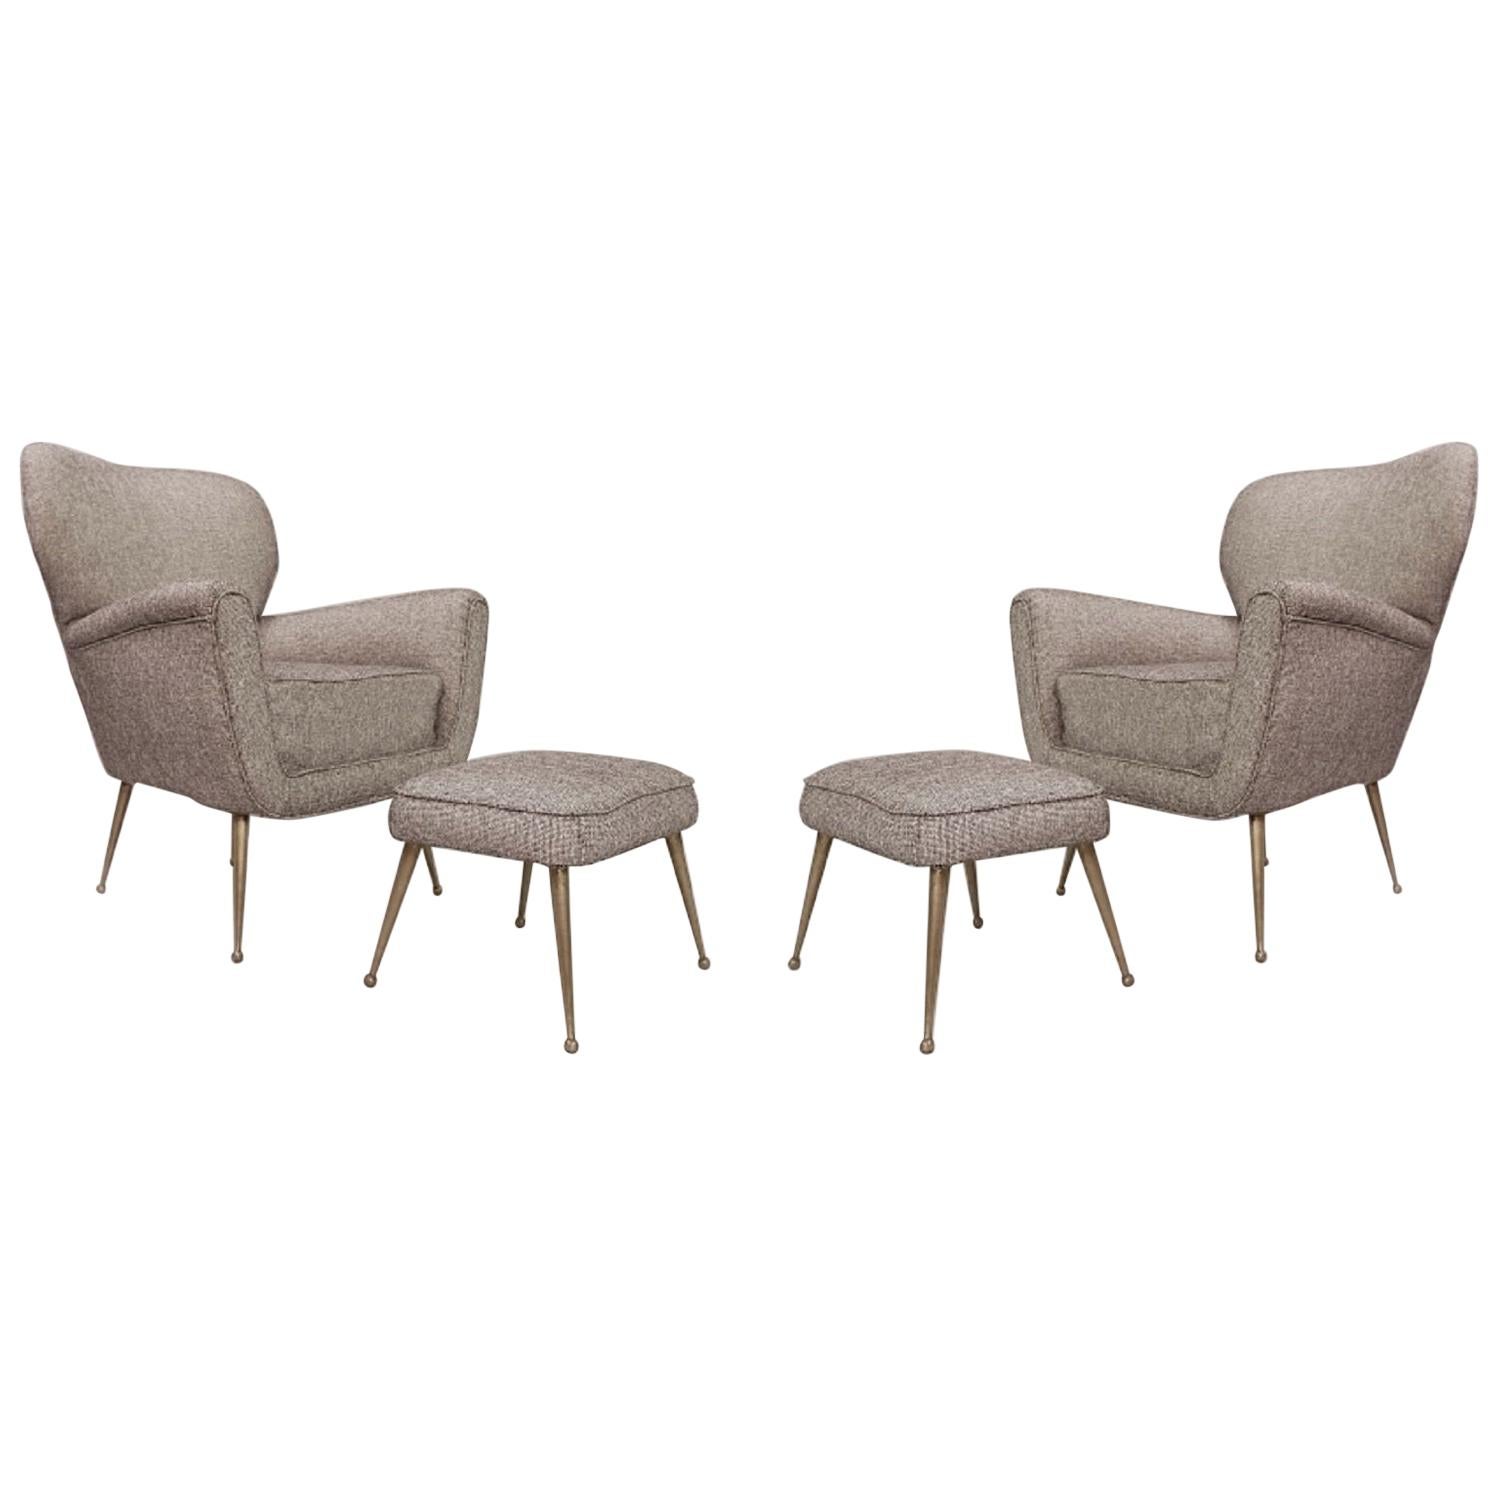 Pair of Italian Armchairs with Ottomans, New Upholstery